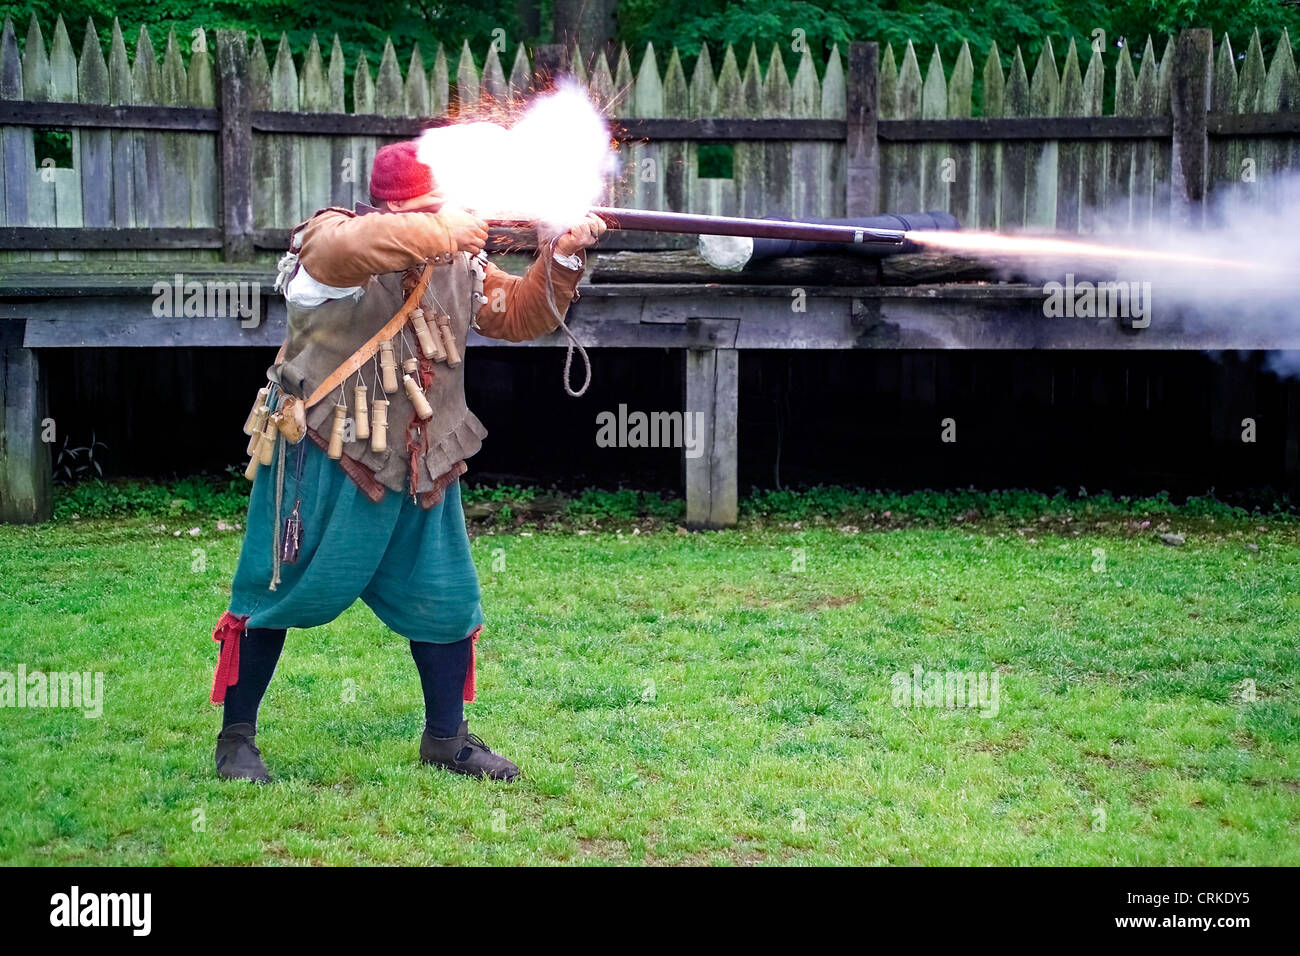 A historical interpreter fires a matchlock musket after demonstrating how to load the weapon with gunpowder at Jamestown Settlement in Virginia, USA. Stock Photo